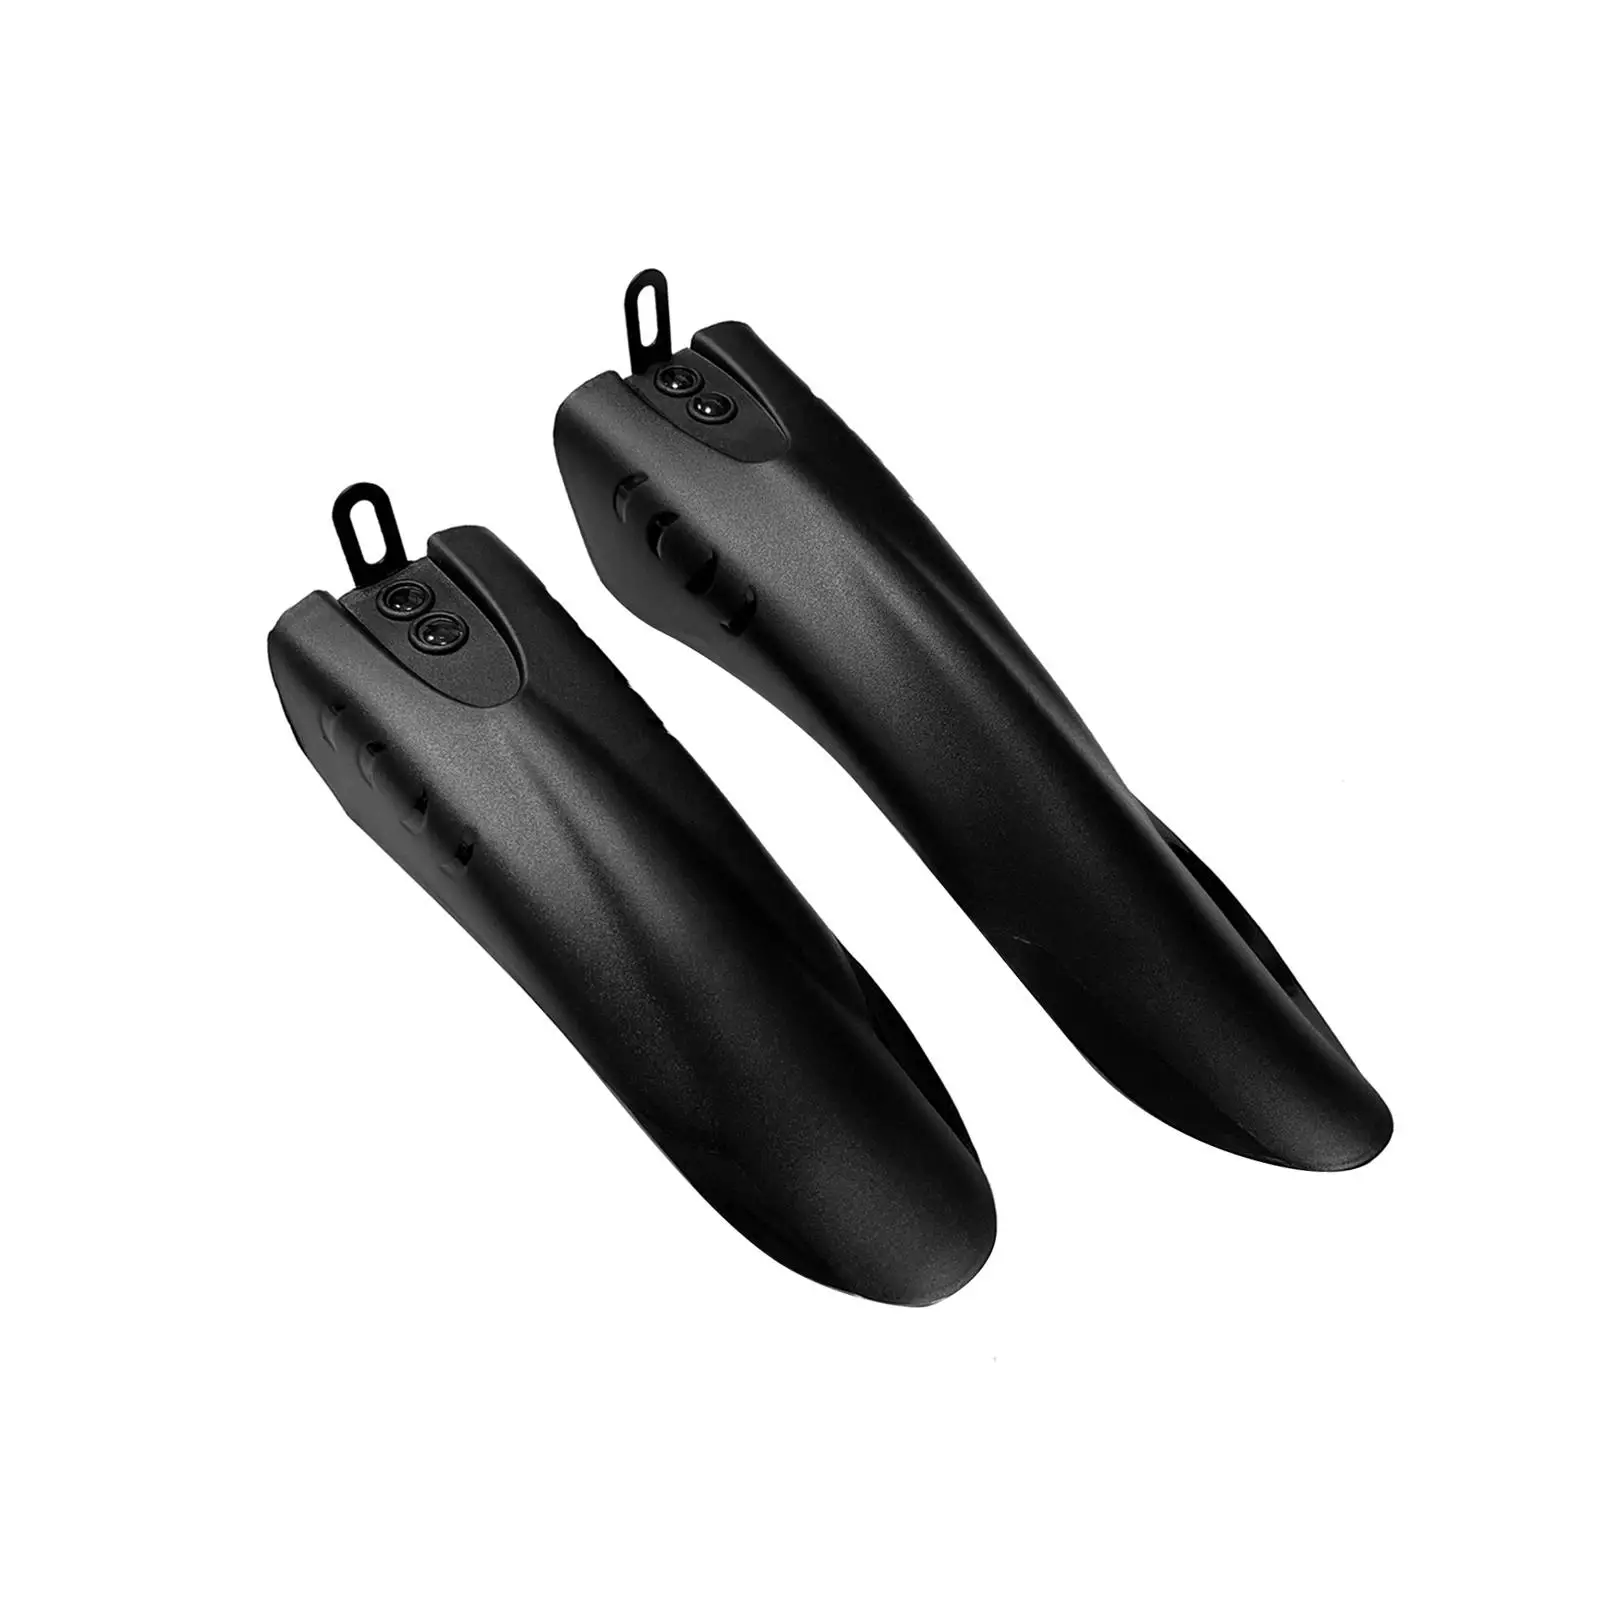 Bike Mudguard Front Rear Set Easy to Install Repair Parts Accs Replaces Mudflap for Mountain Bike Riding Outdoor Sports